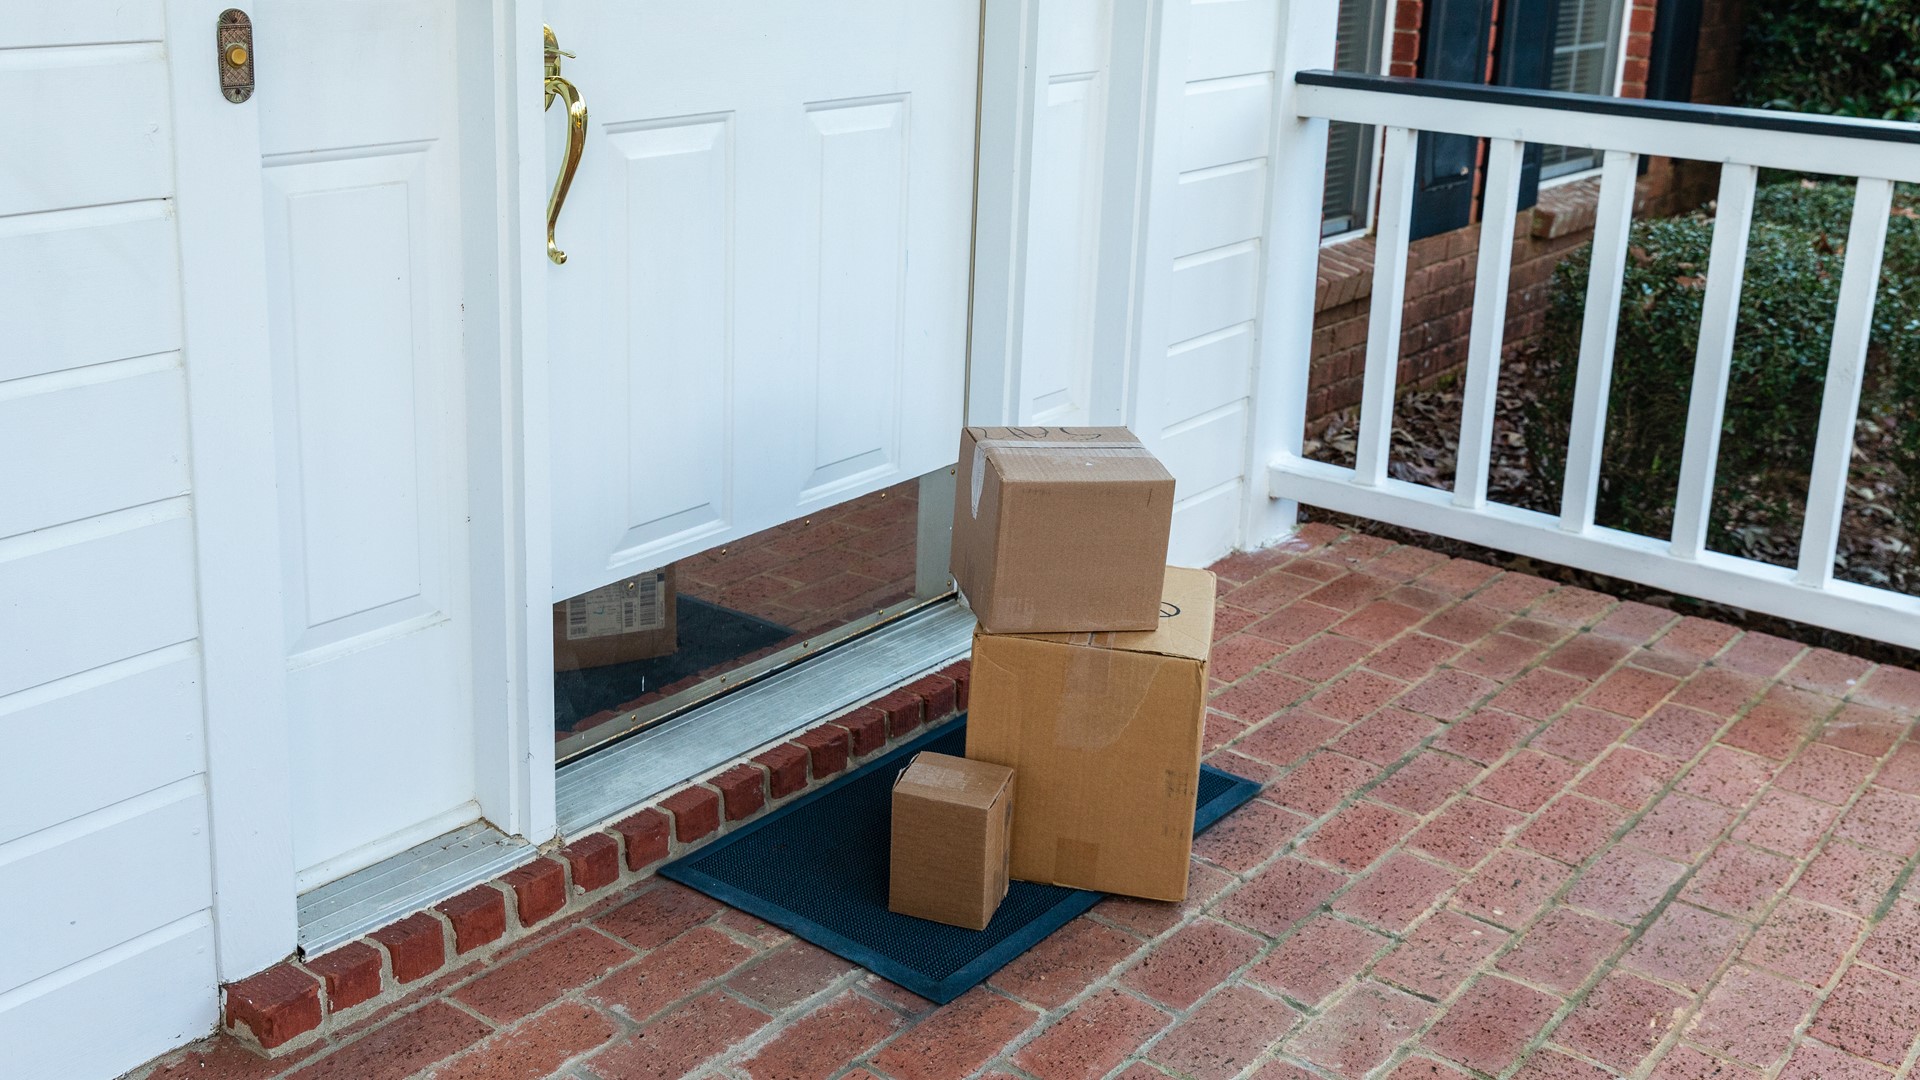 USPS, UPS and FedEx shared their deadlines to have Christmas cards and packages arrive on time.